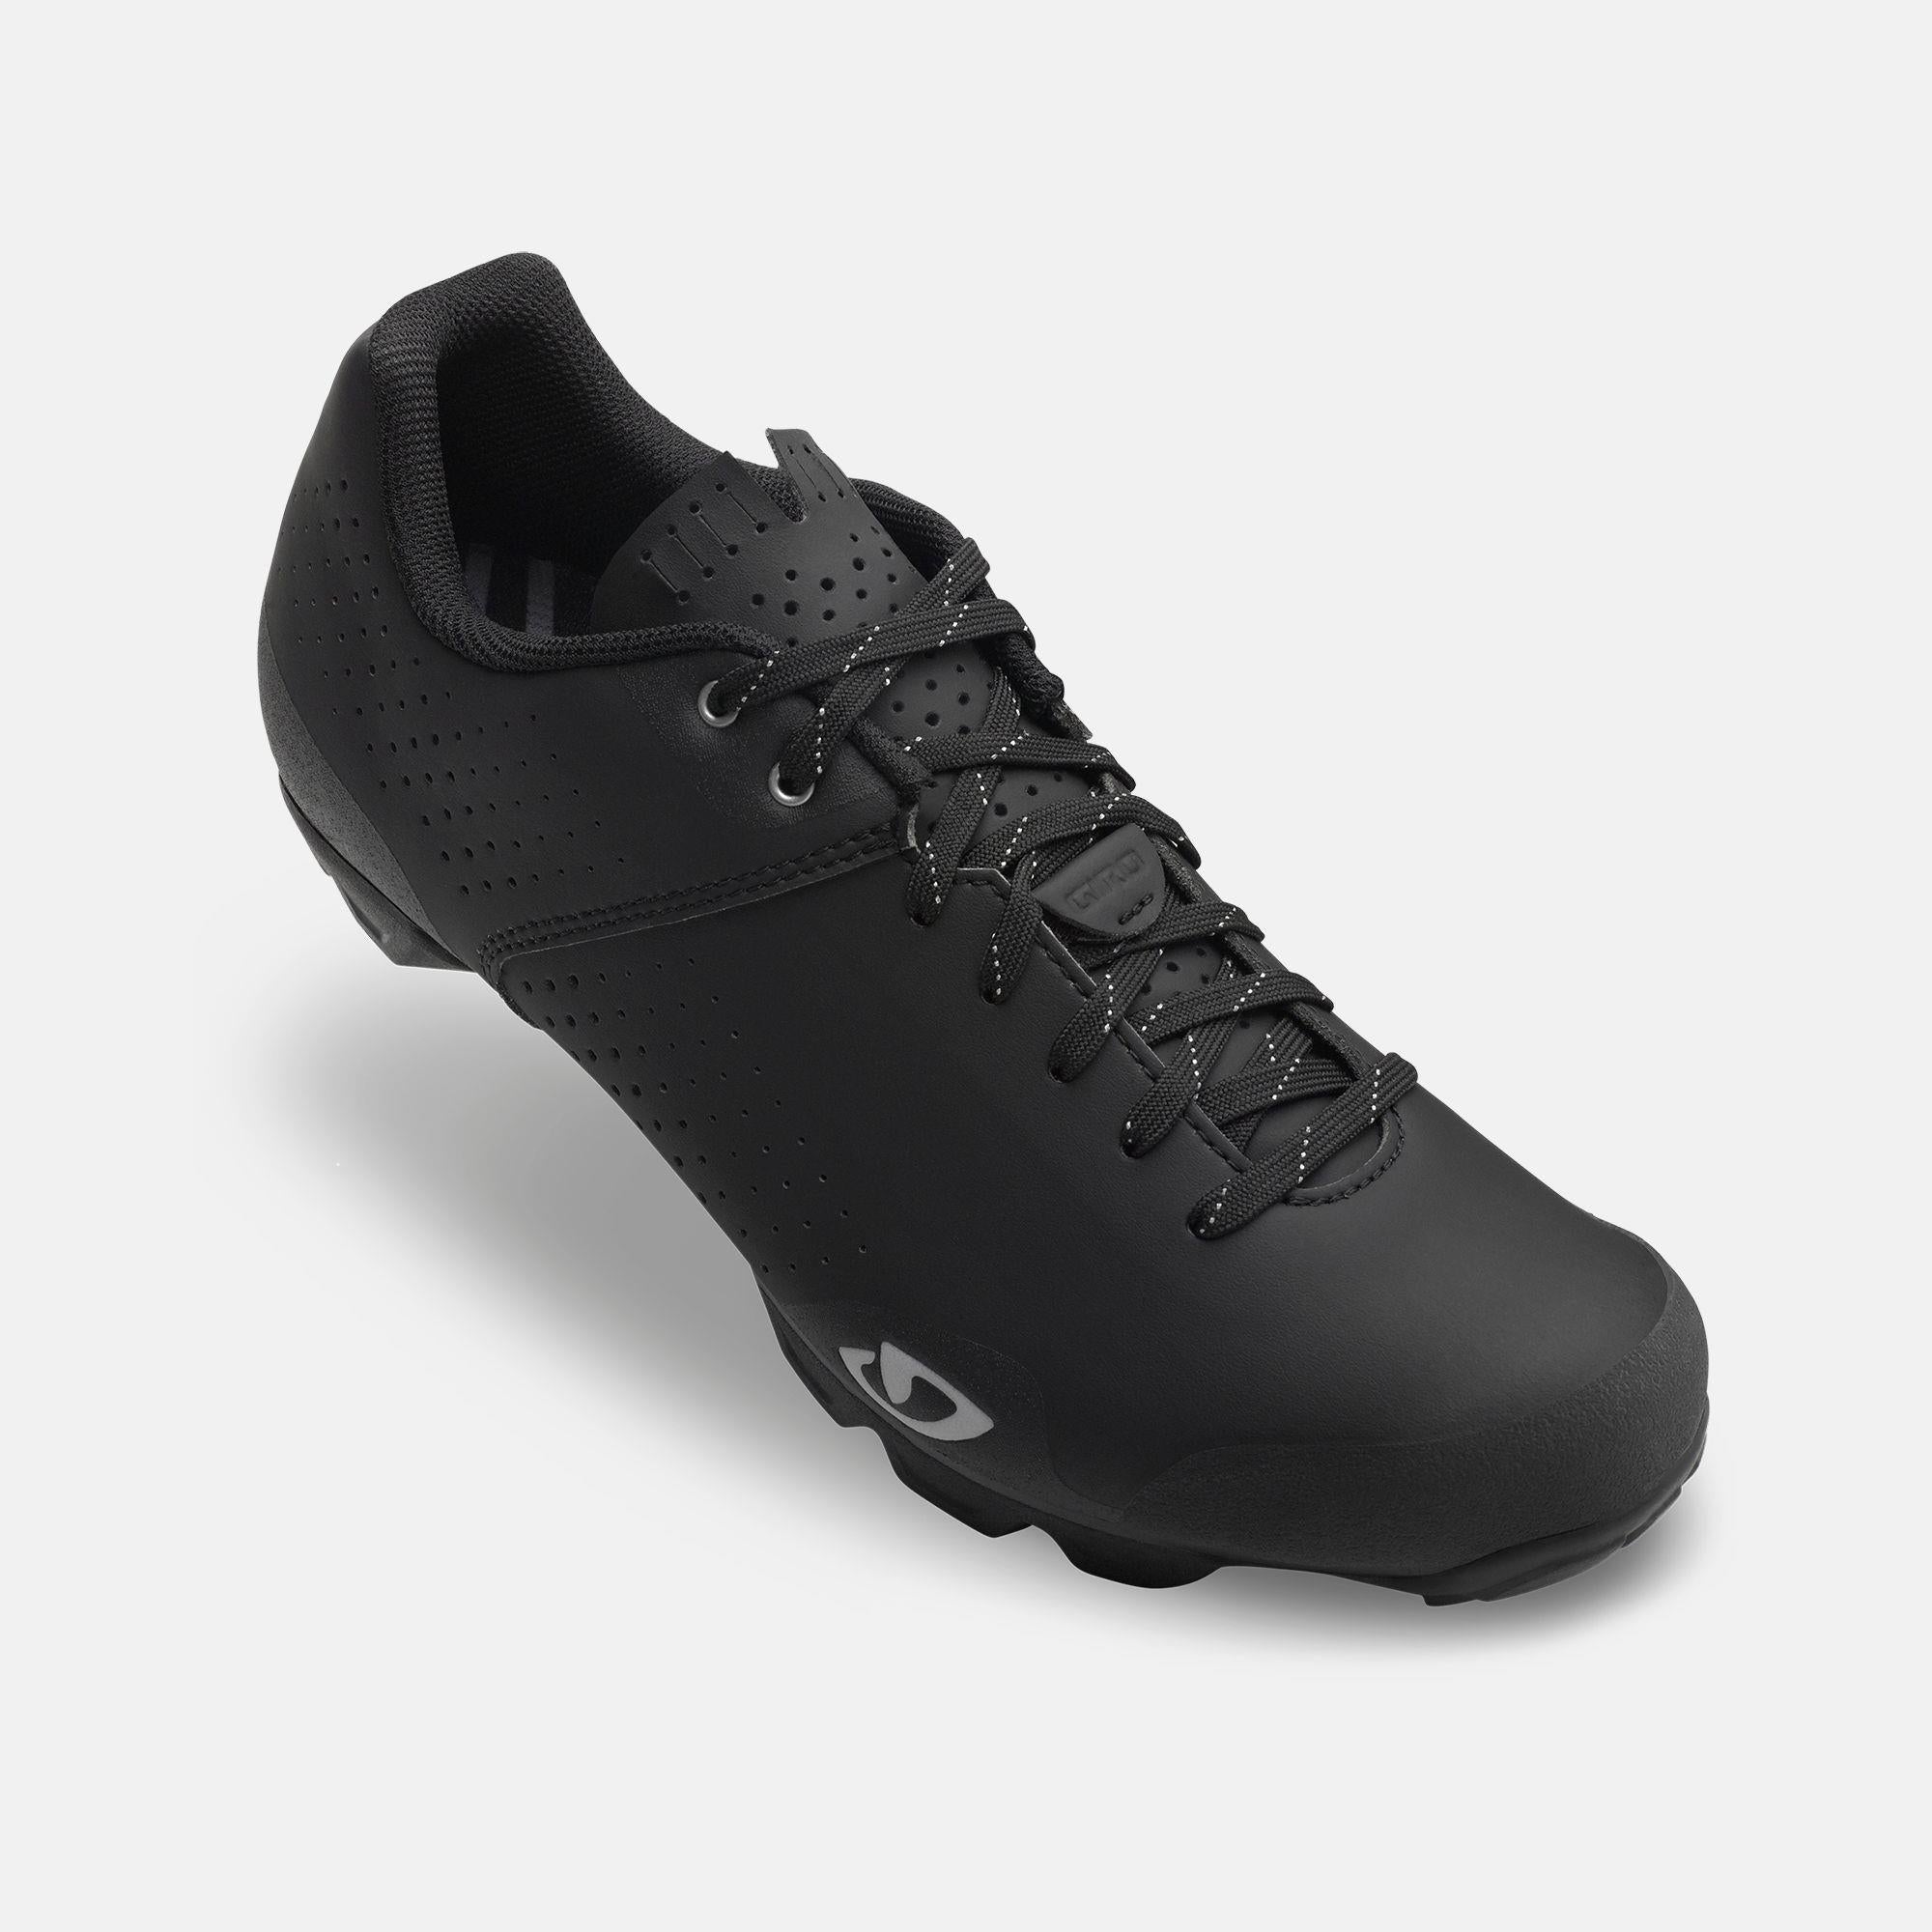 Privateer Lace MTB Cycling Shoes